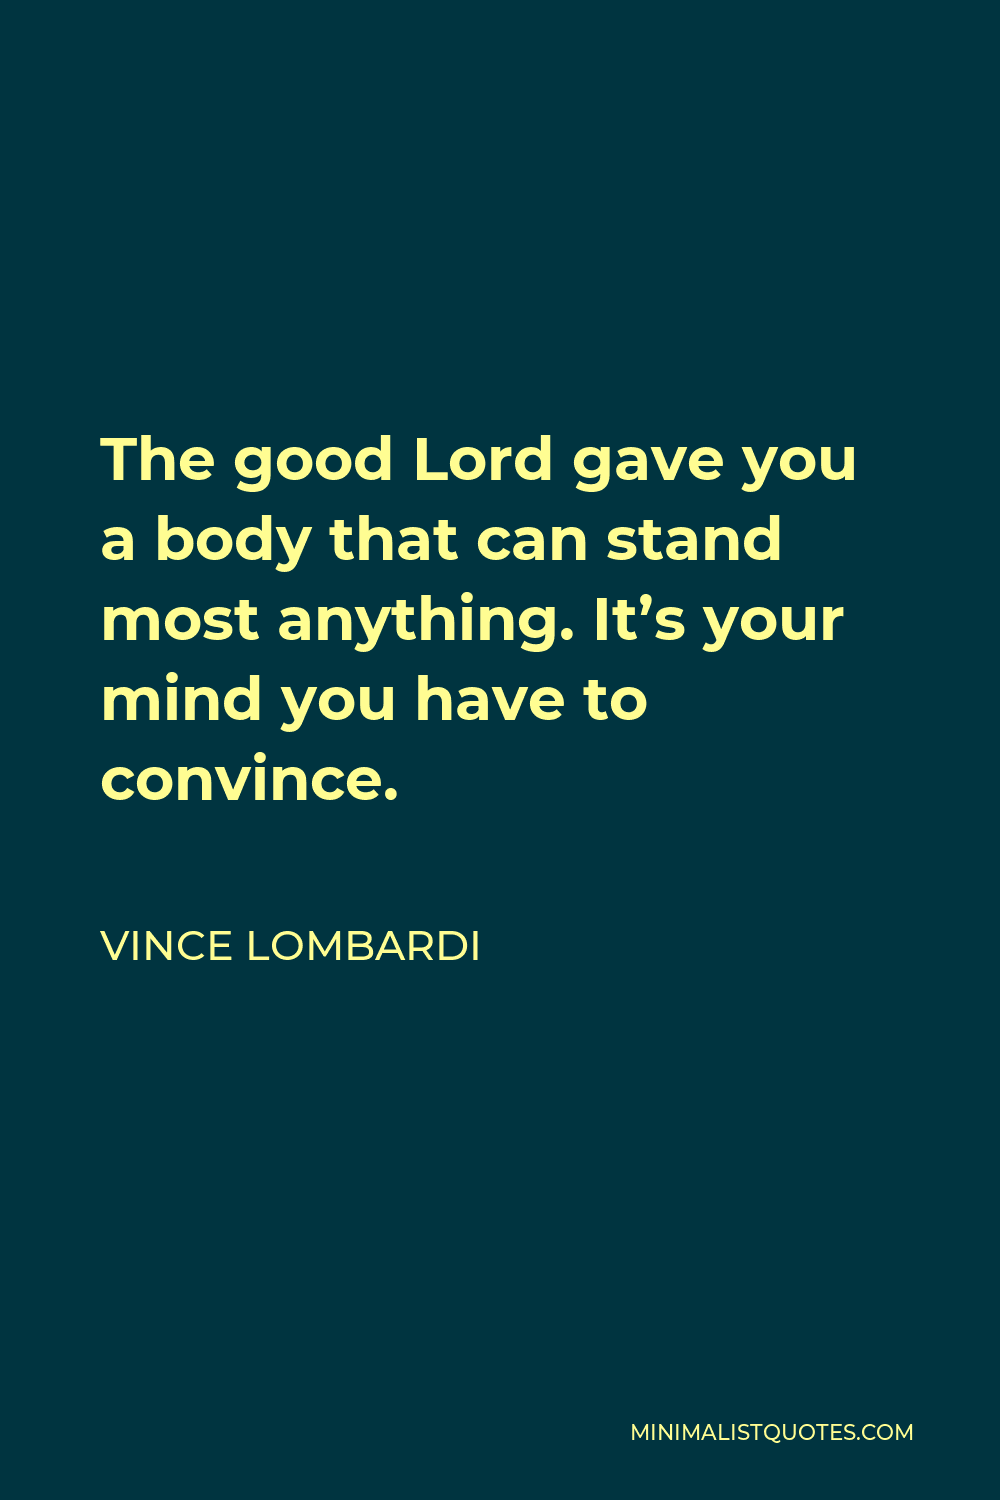 Vince Lombardi Quote - The good Lord gave you a body that can stand most anything. It’s your mind you have to convince.